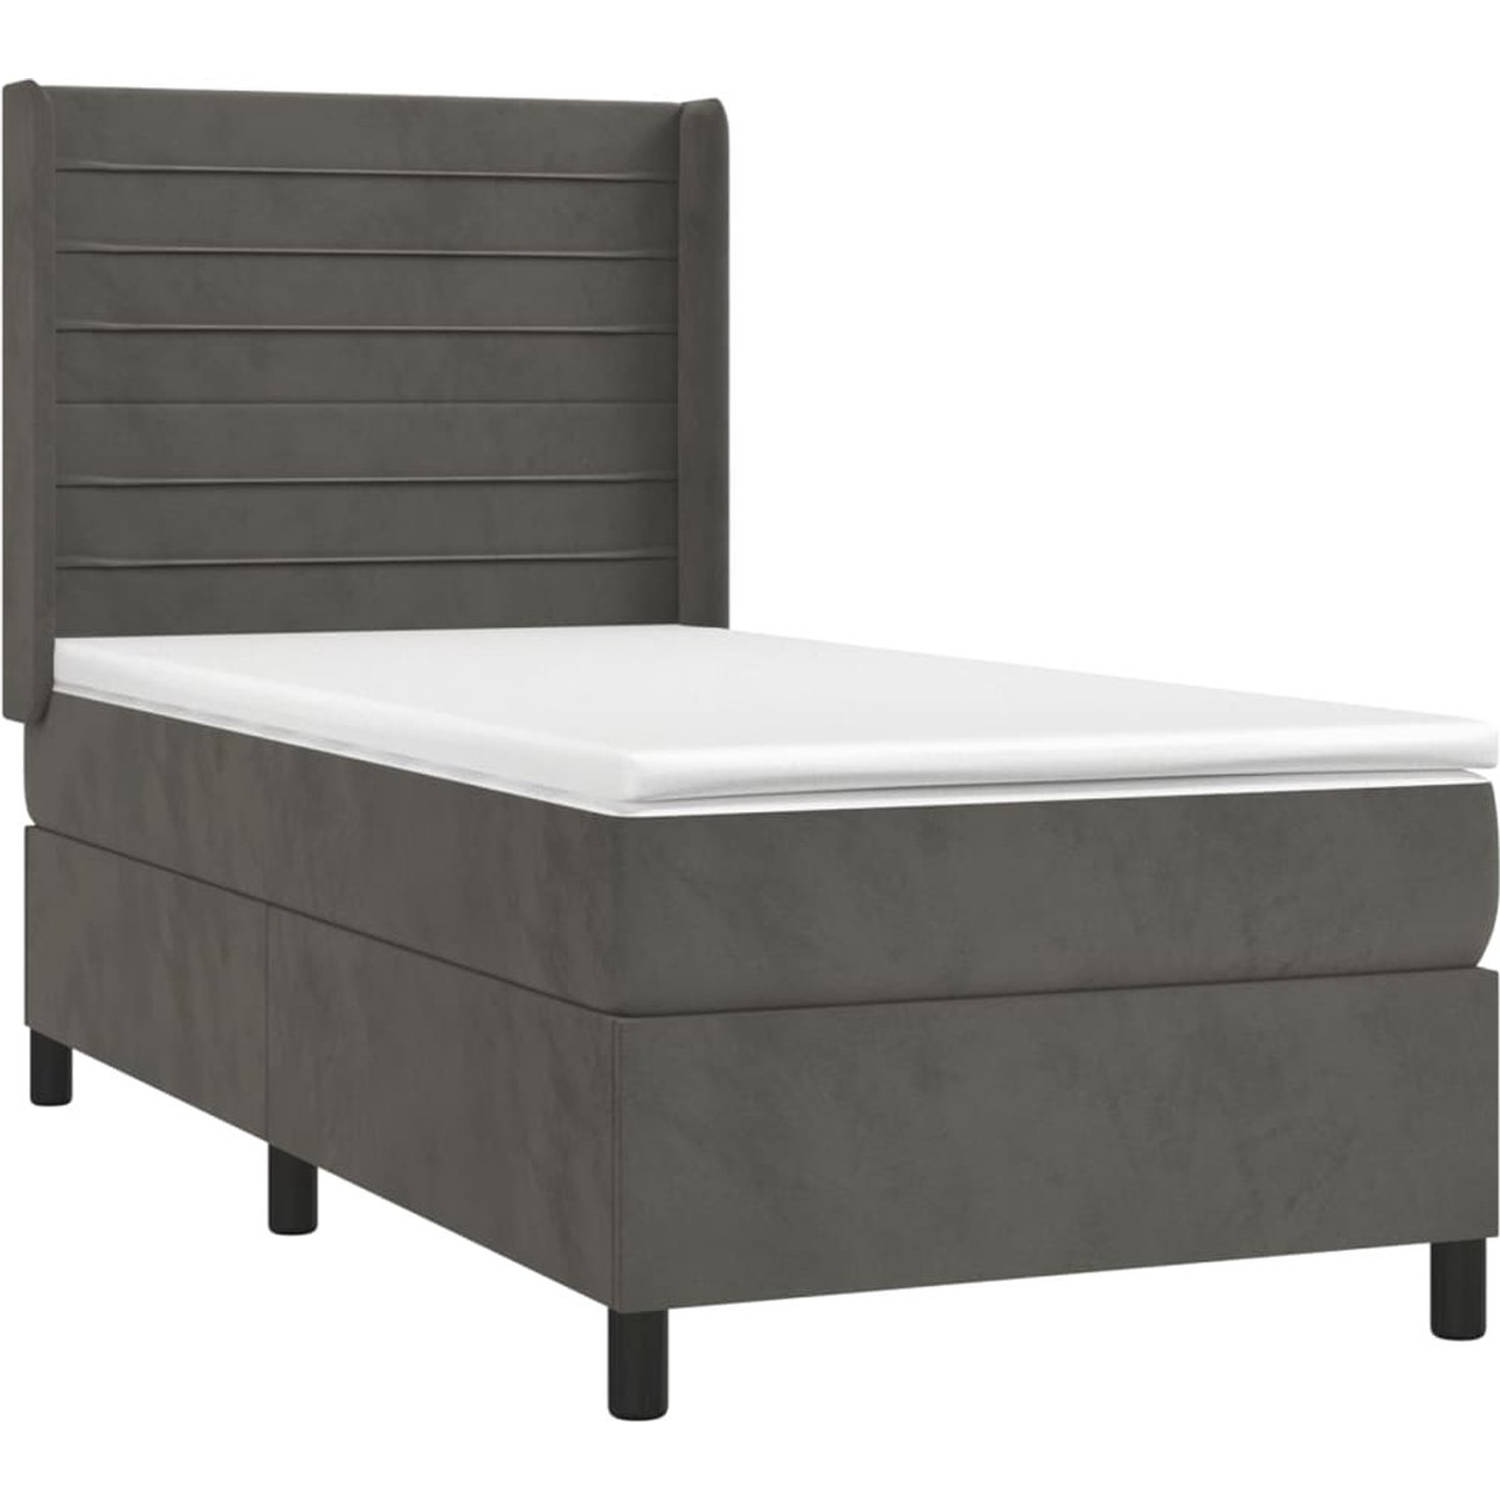 The Living Store Boxspringbed - Bed - 203 x 93 x 118/128 cm - Donkergrijs